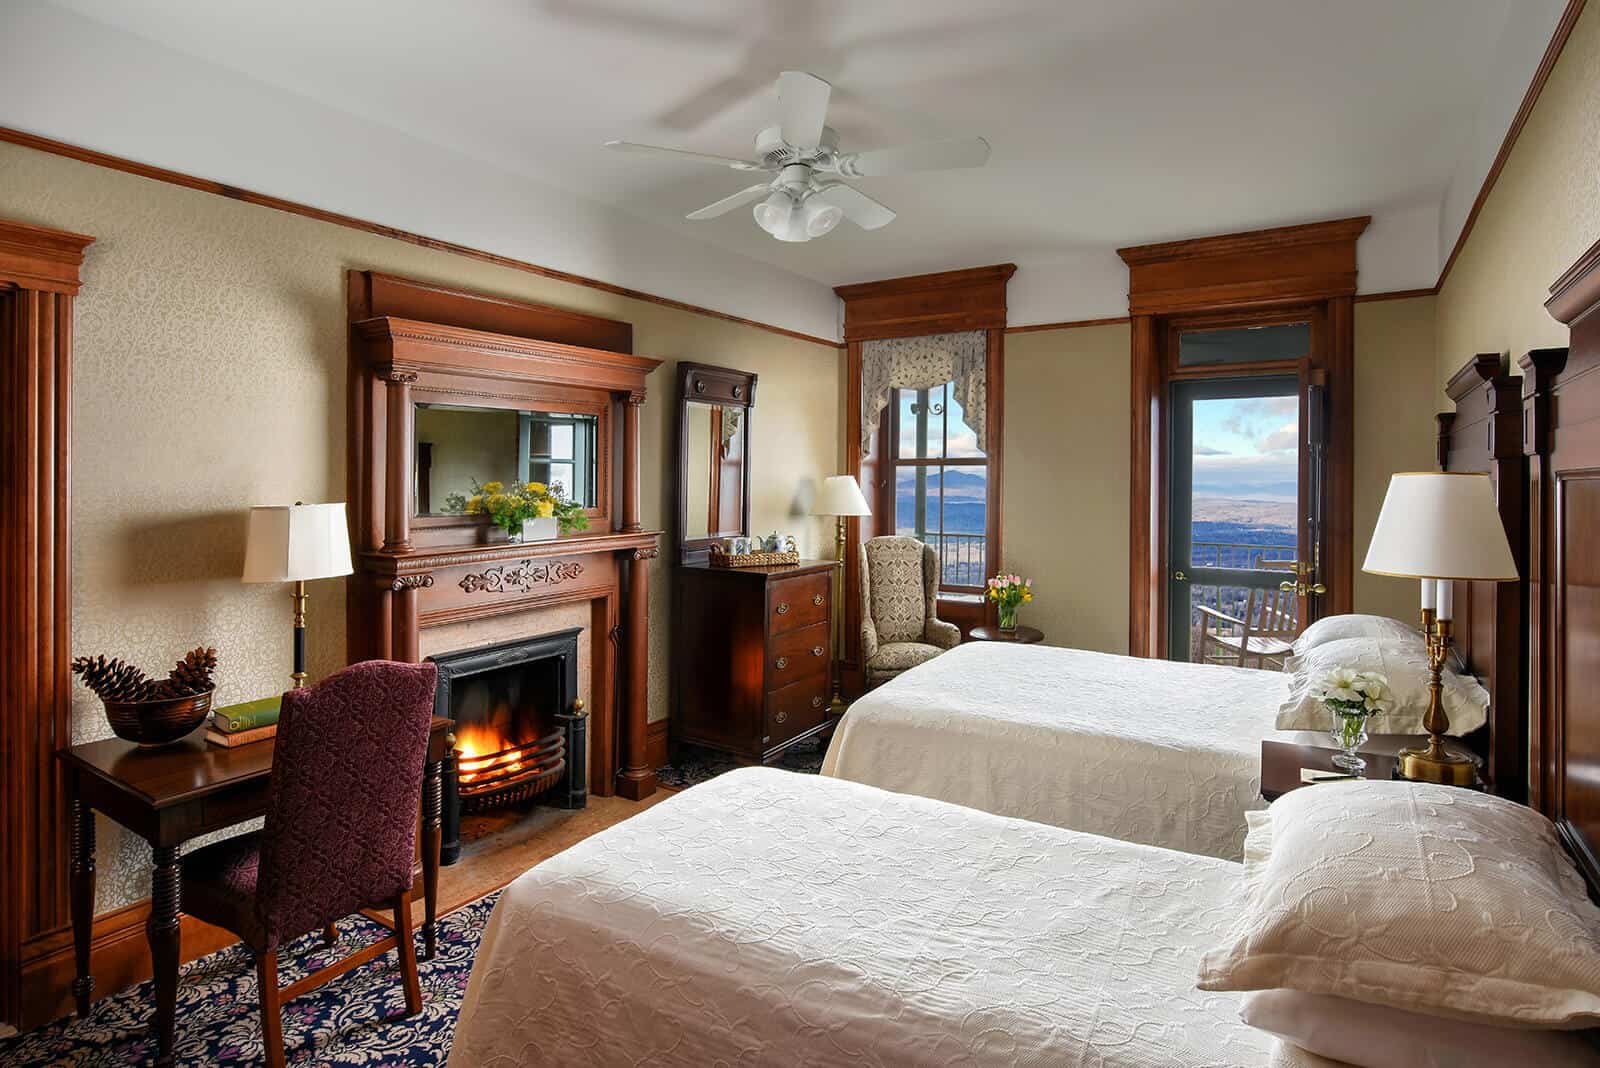 Mohonk Mountain House Accommodations that have 2 double beds. There is a fireplace and and small desk on the other side of the room. There is a balcony that has the Hudson Valley View